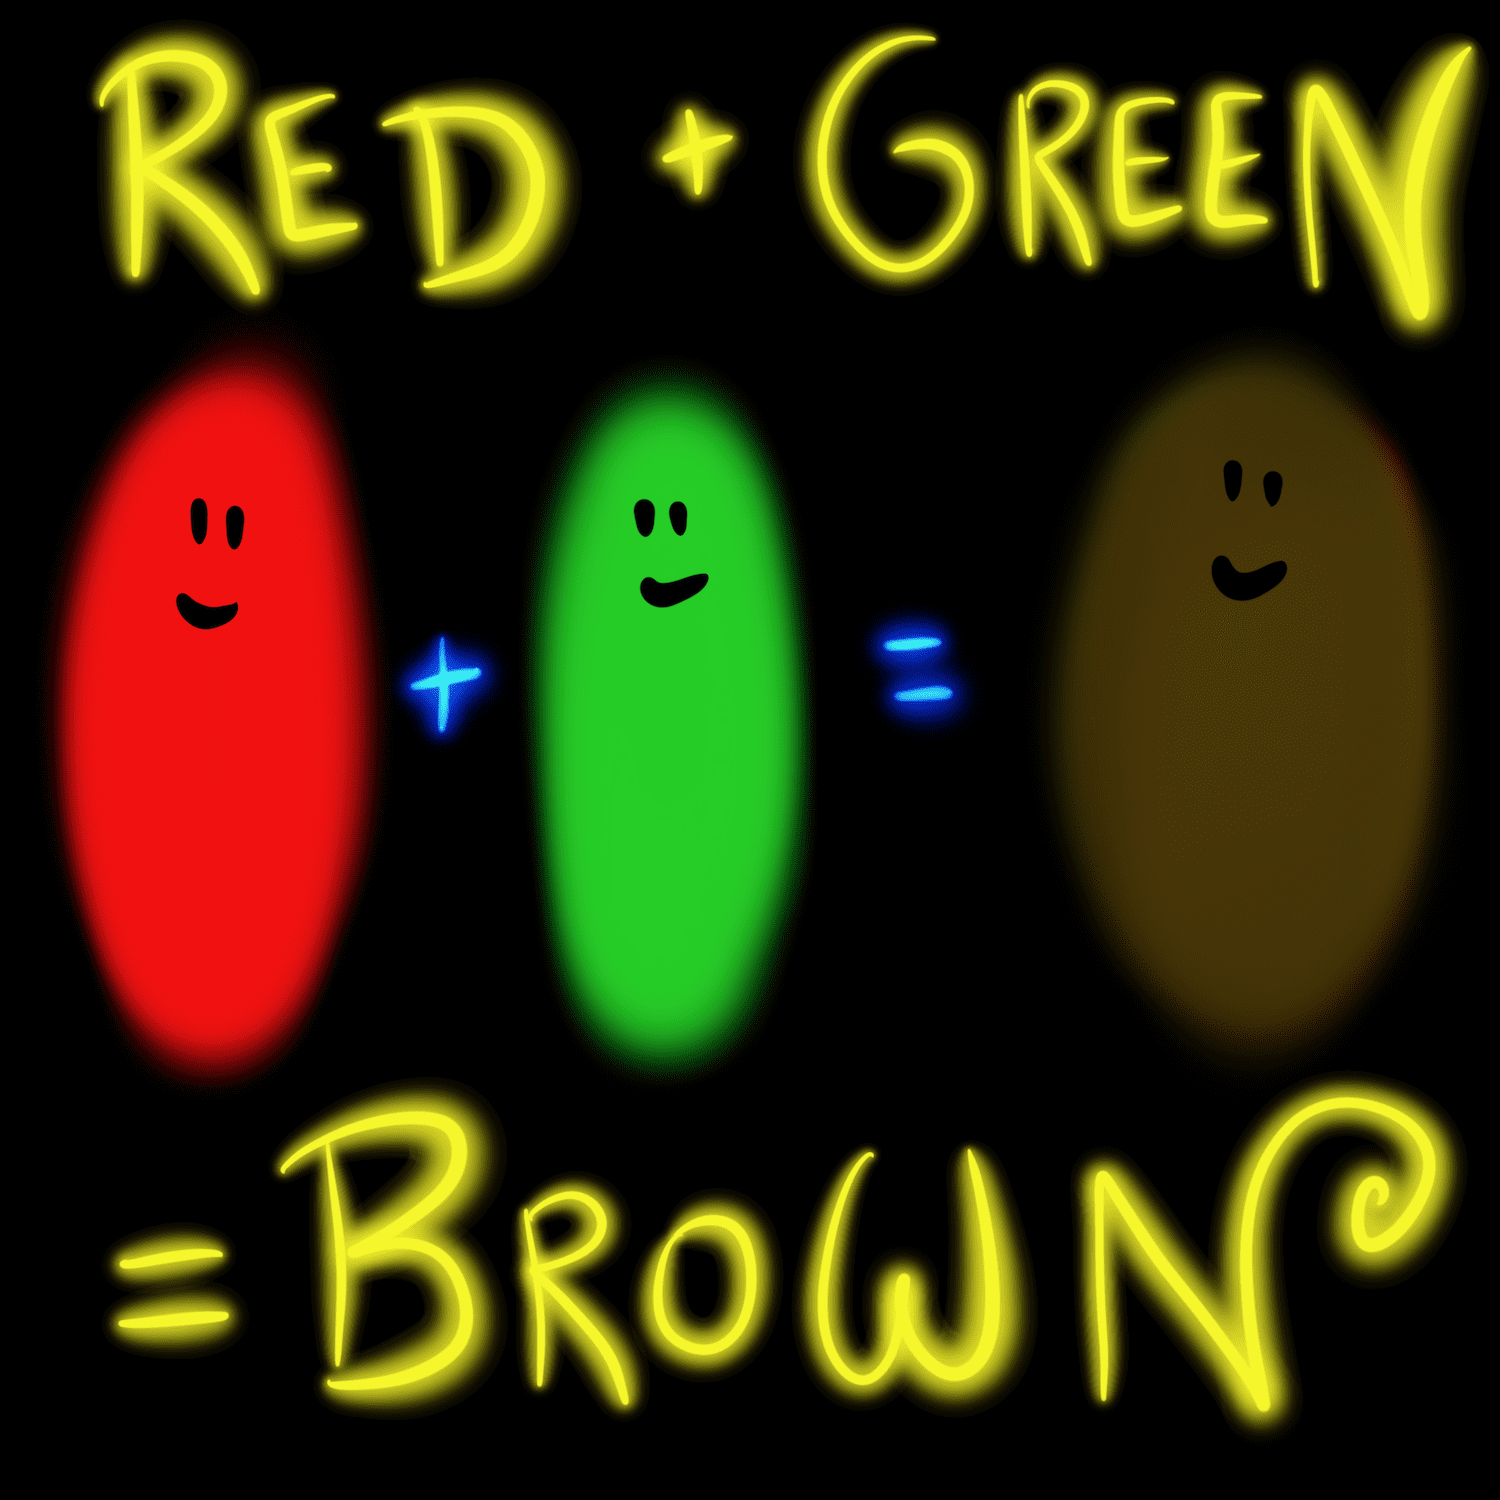 What does red and green make?